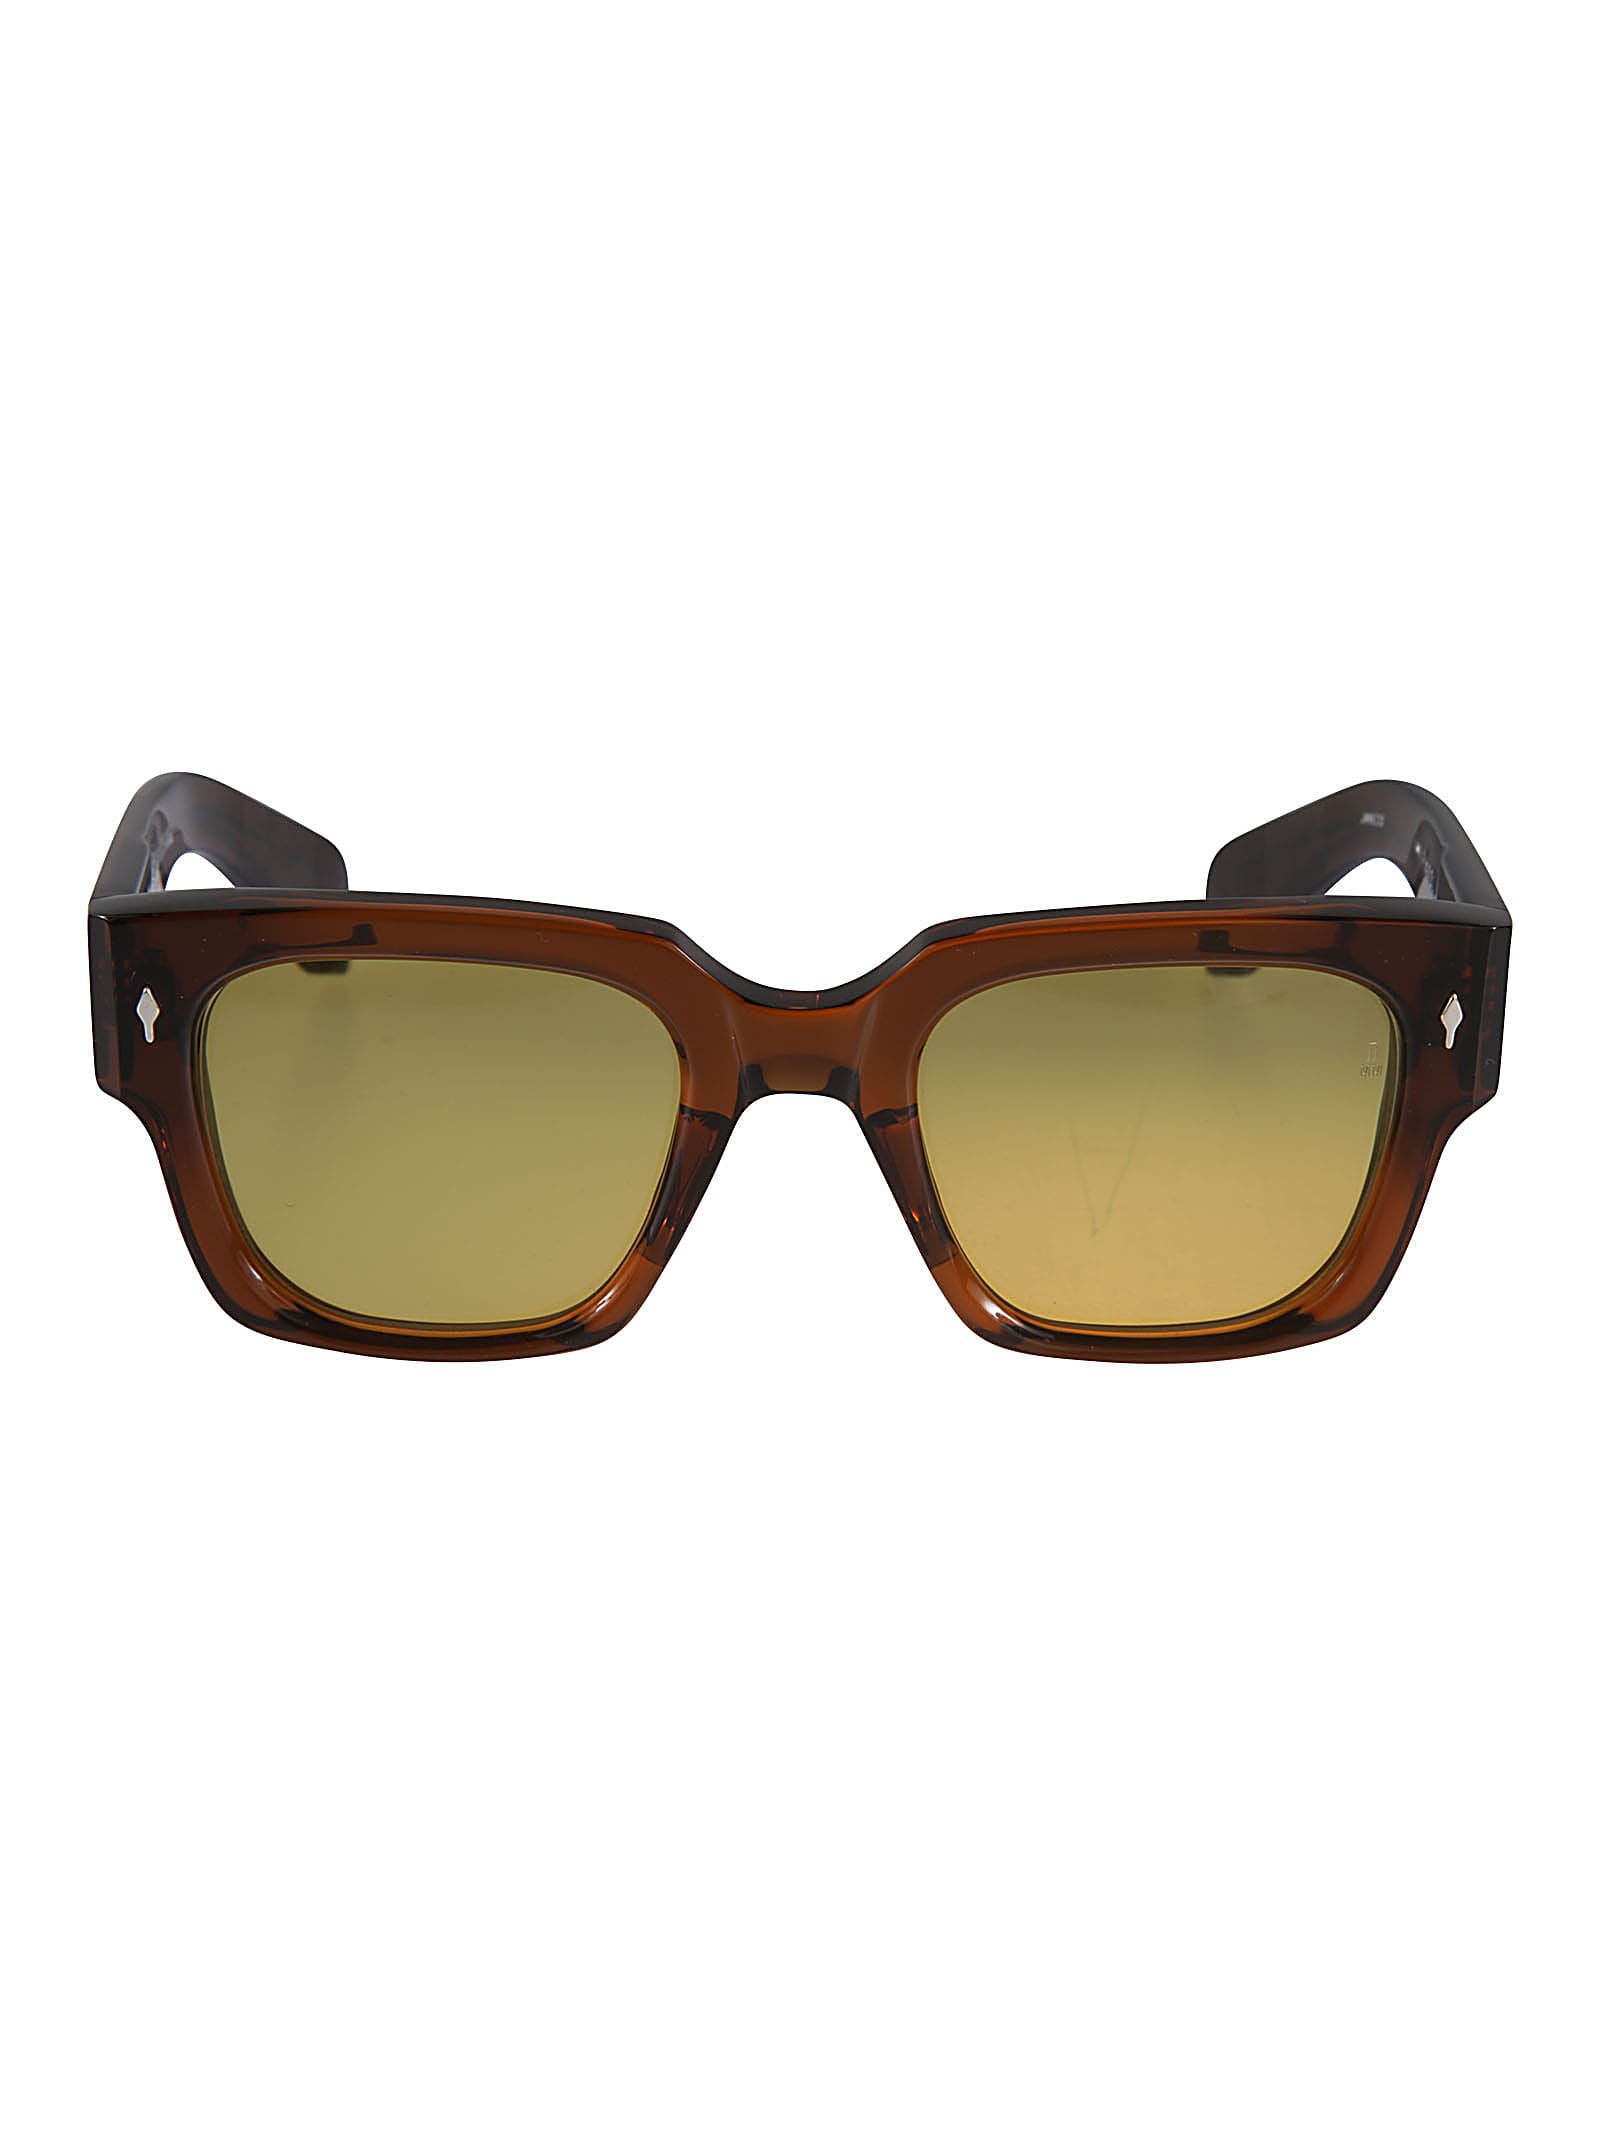 Jacques Marie Mage Engraved Logo Sunglasses In Brown/yellow